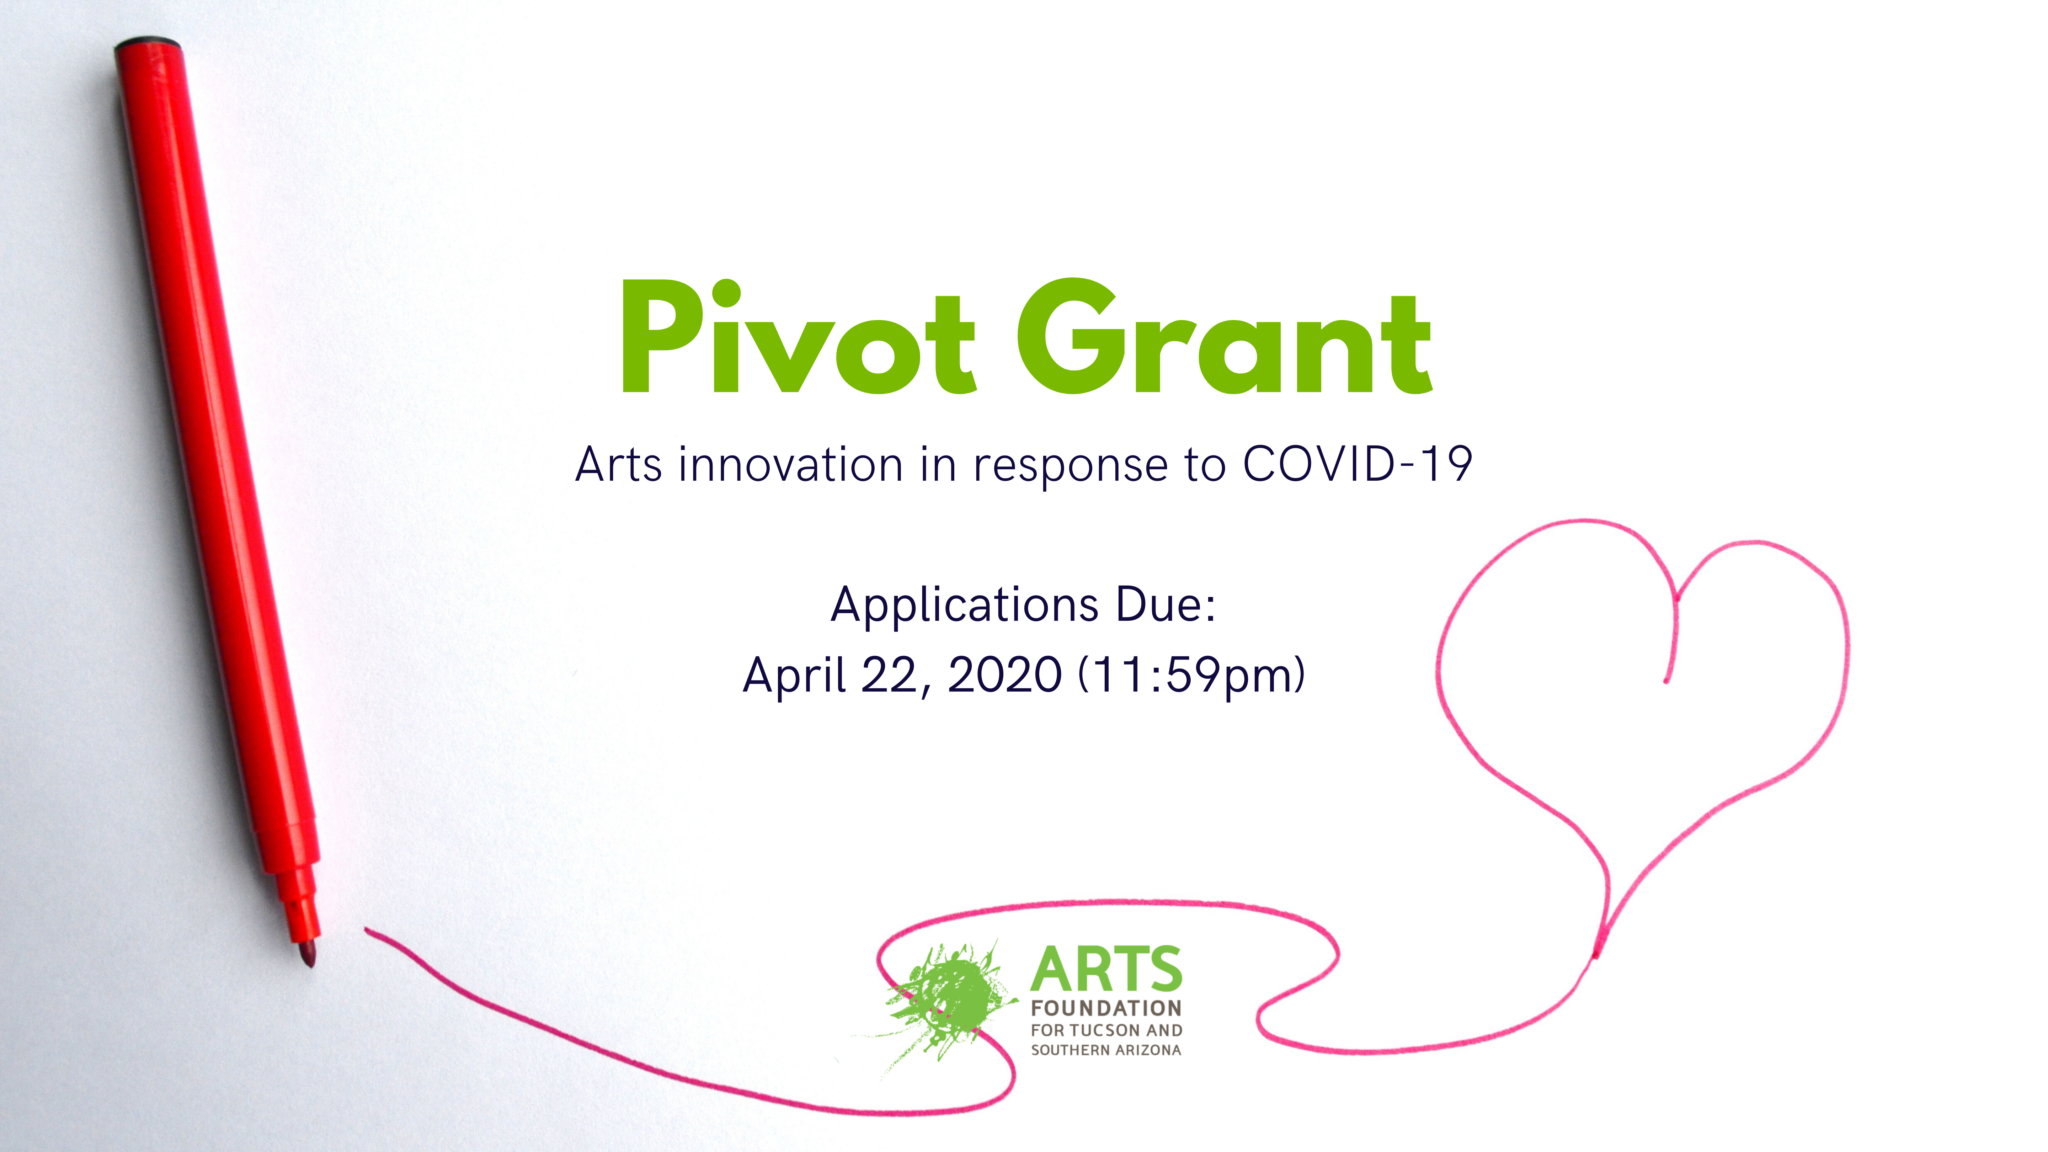 Pivot Grant: Applications accepted through April 22